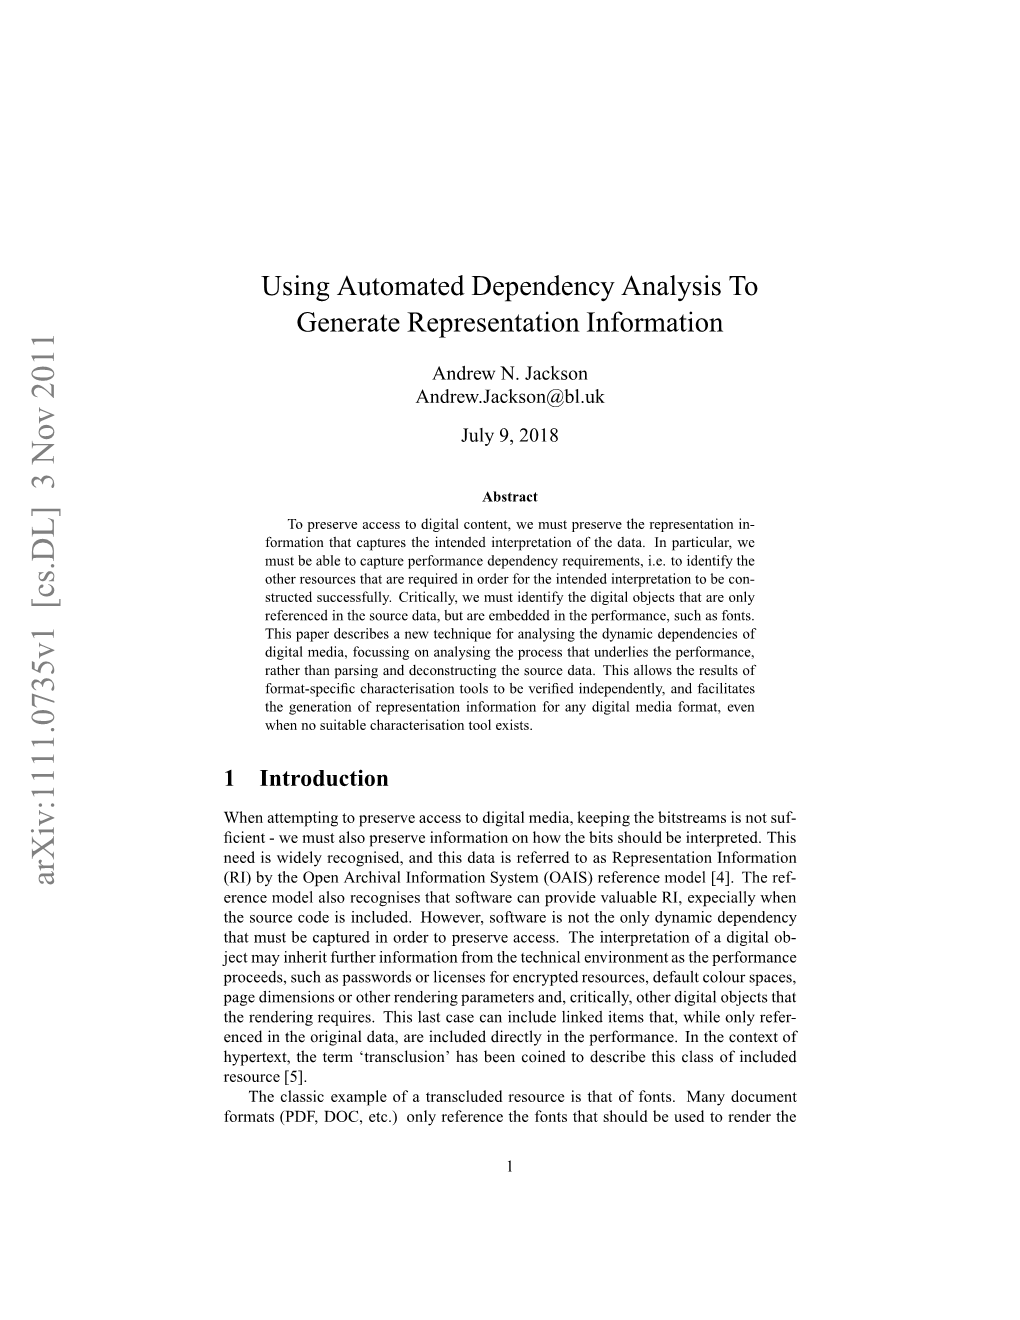 Using Automated Dependency Analysis to Generate